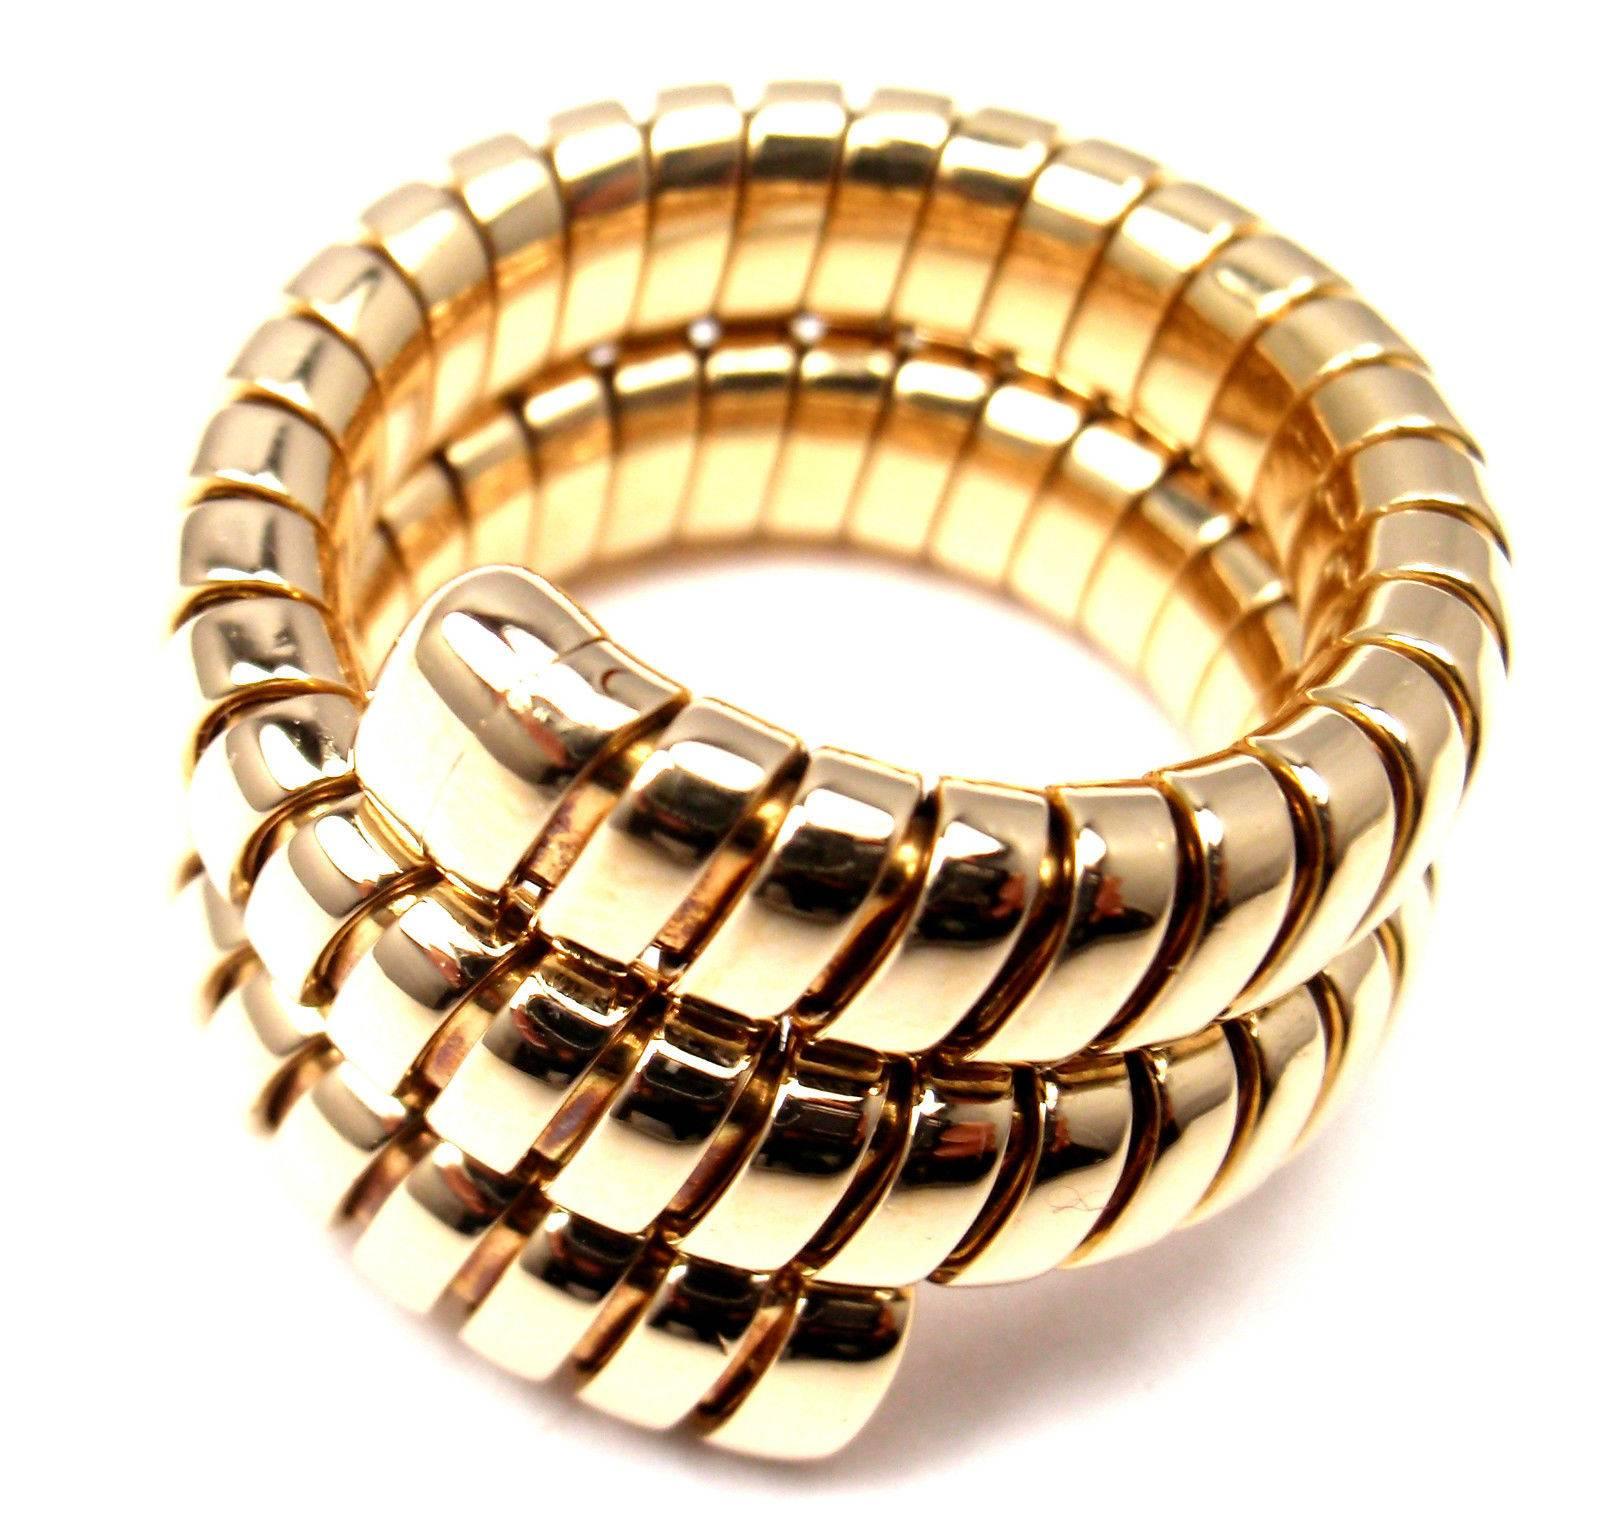 18k Yellow Gold Wrap Tubogas Snake ring by Bulgari.
This ring comes with an original Bulgari box.

Details:
Size: 6-8 (Flexible)
Weight:16.9 grams
Width: 15mm
Stamped Hallmarks:  Bulgari, 750, 2337AL
*Free Shipping within the United